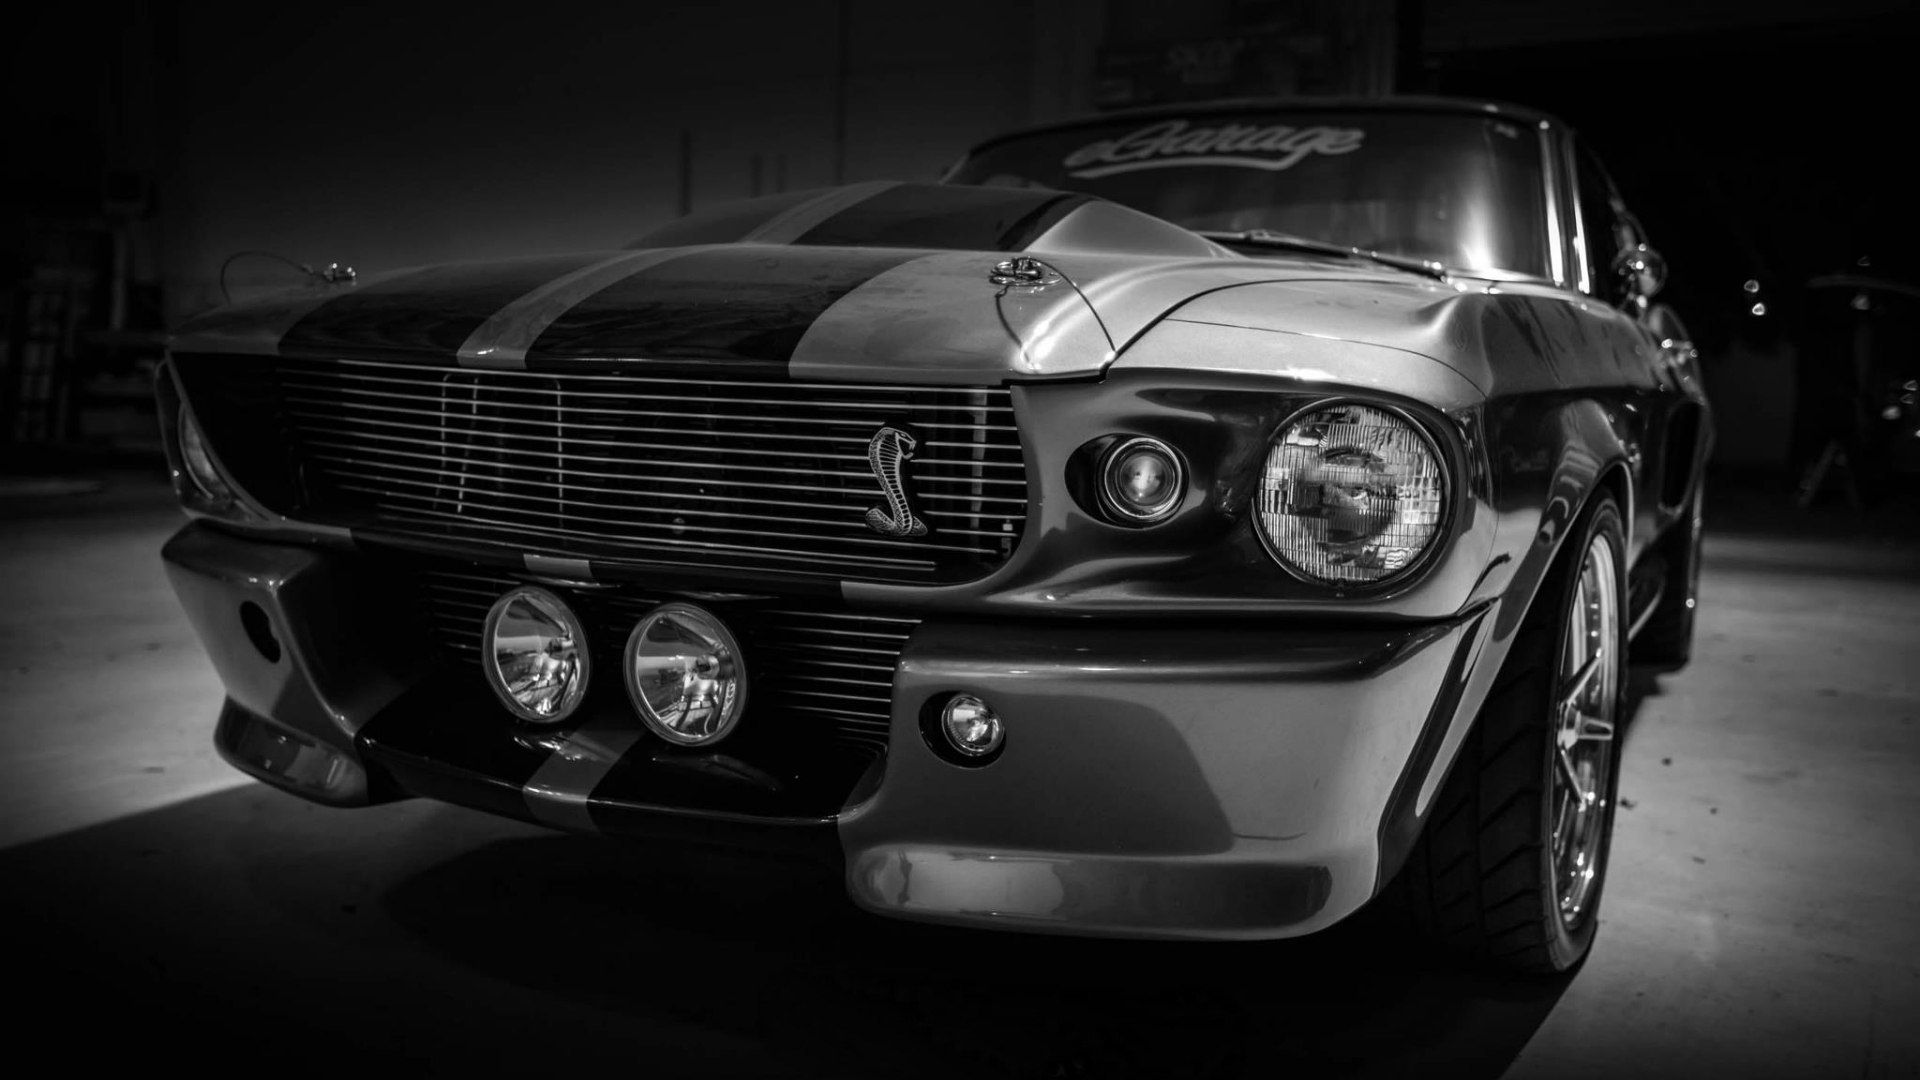 68625 download wallpaper ford mustang, cars, gt500, shelby, eleanor screensavers and pictures for free